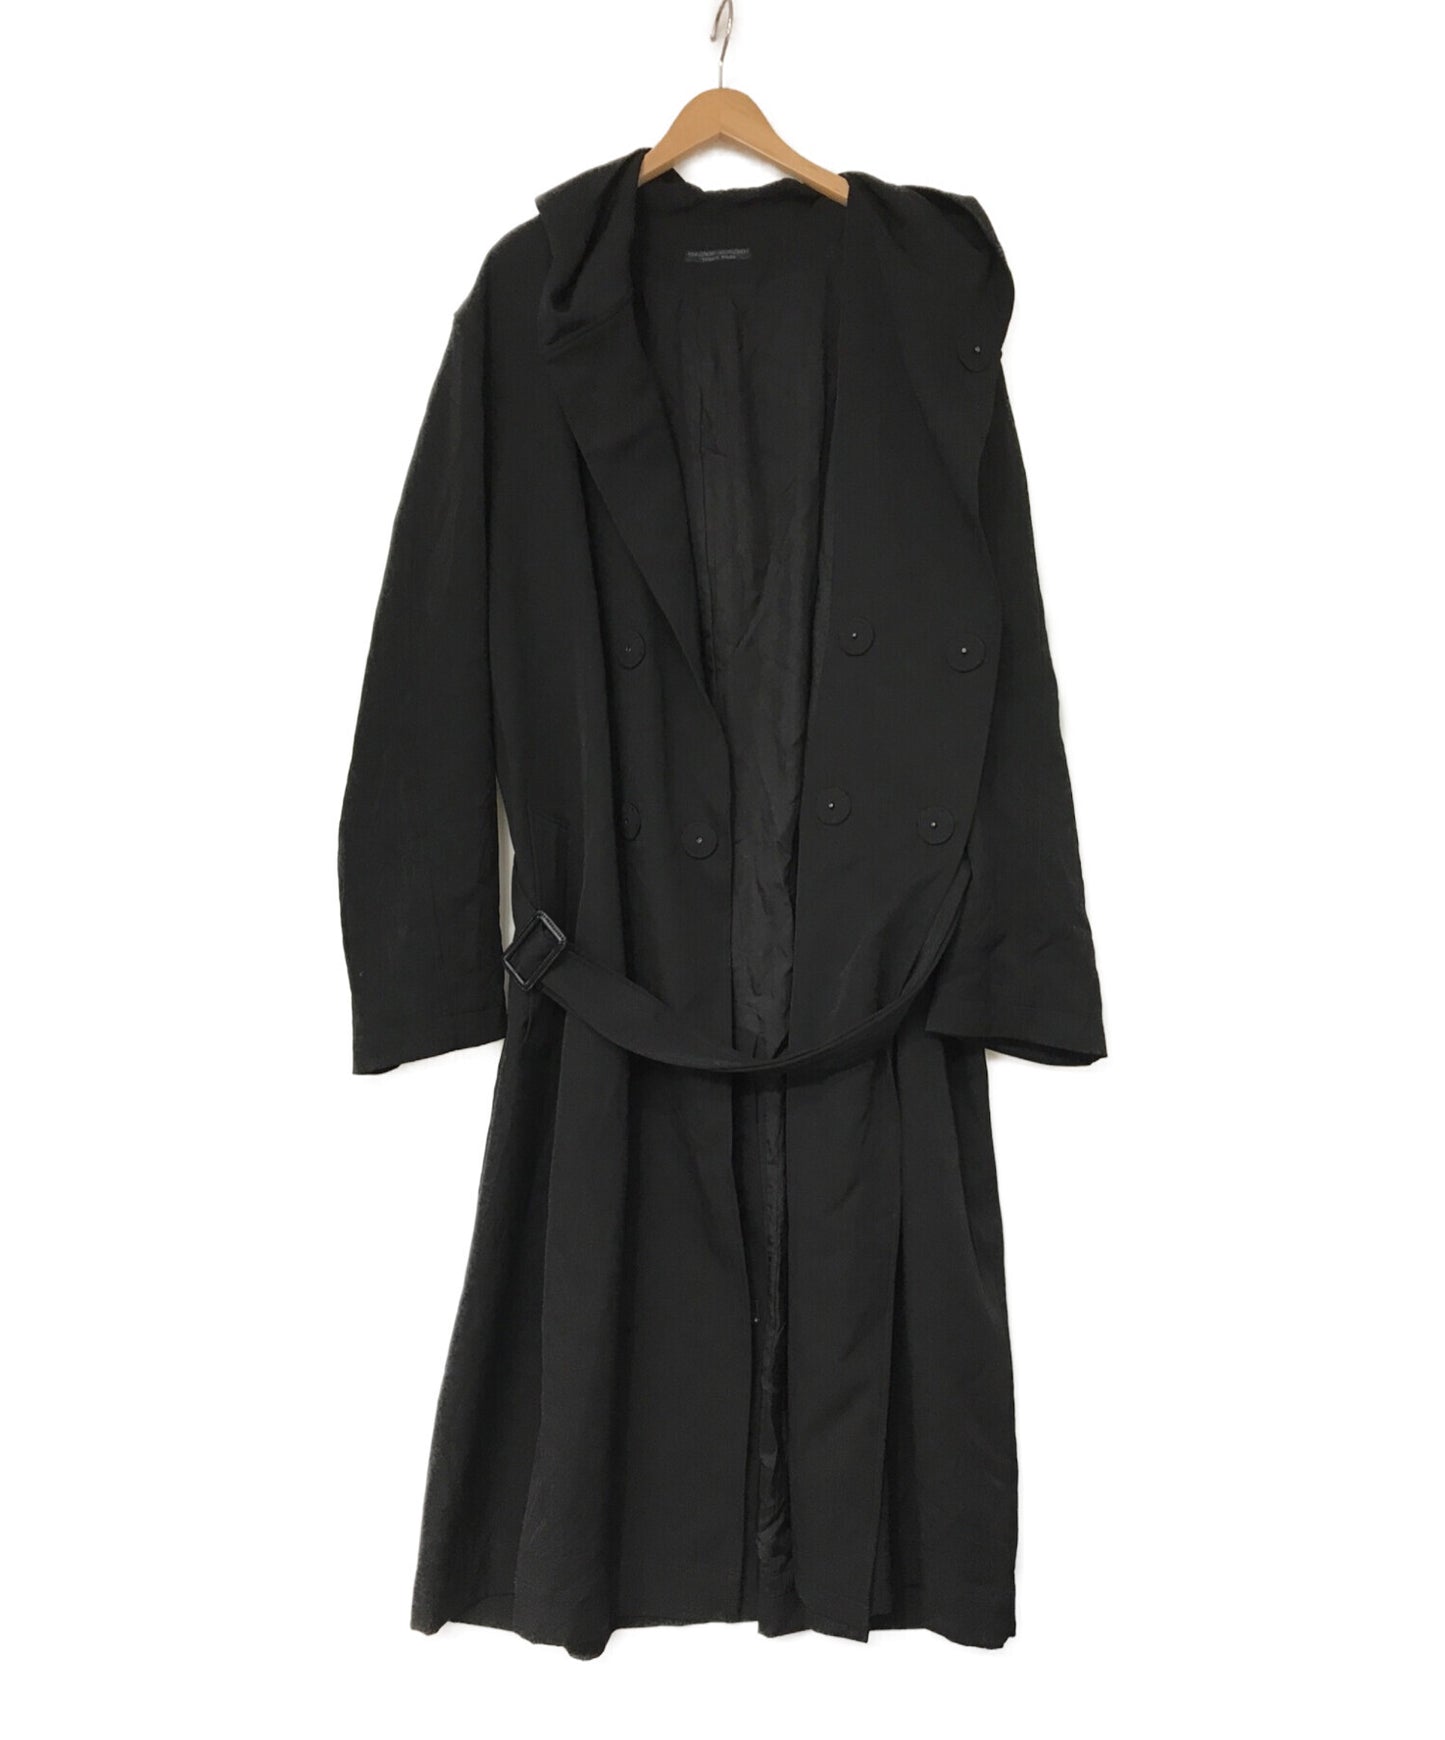 Yohji Yamamoto POUR HOMME 20AW 3BUTTON DOUBLE HOODED COAT HR-C01-140